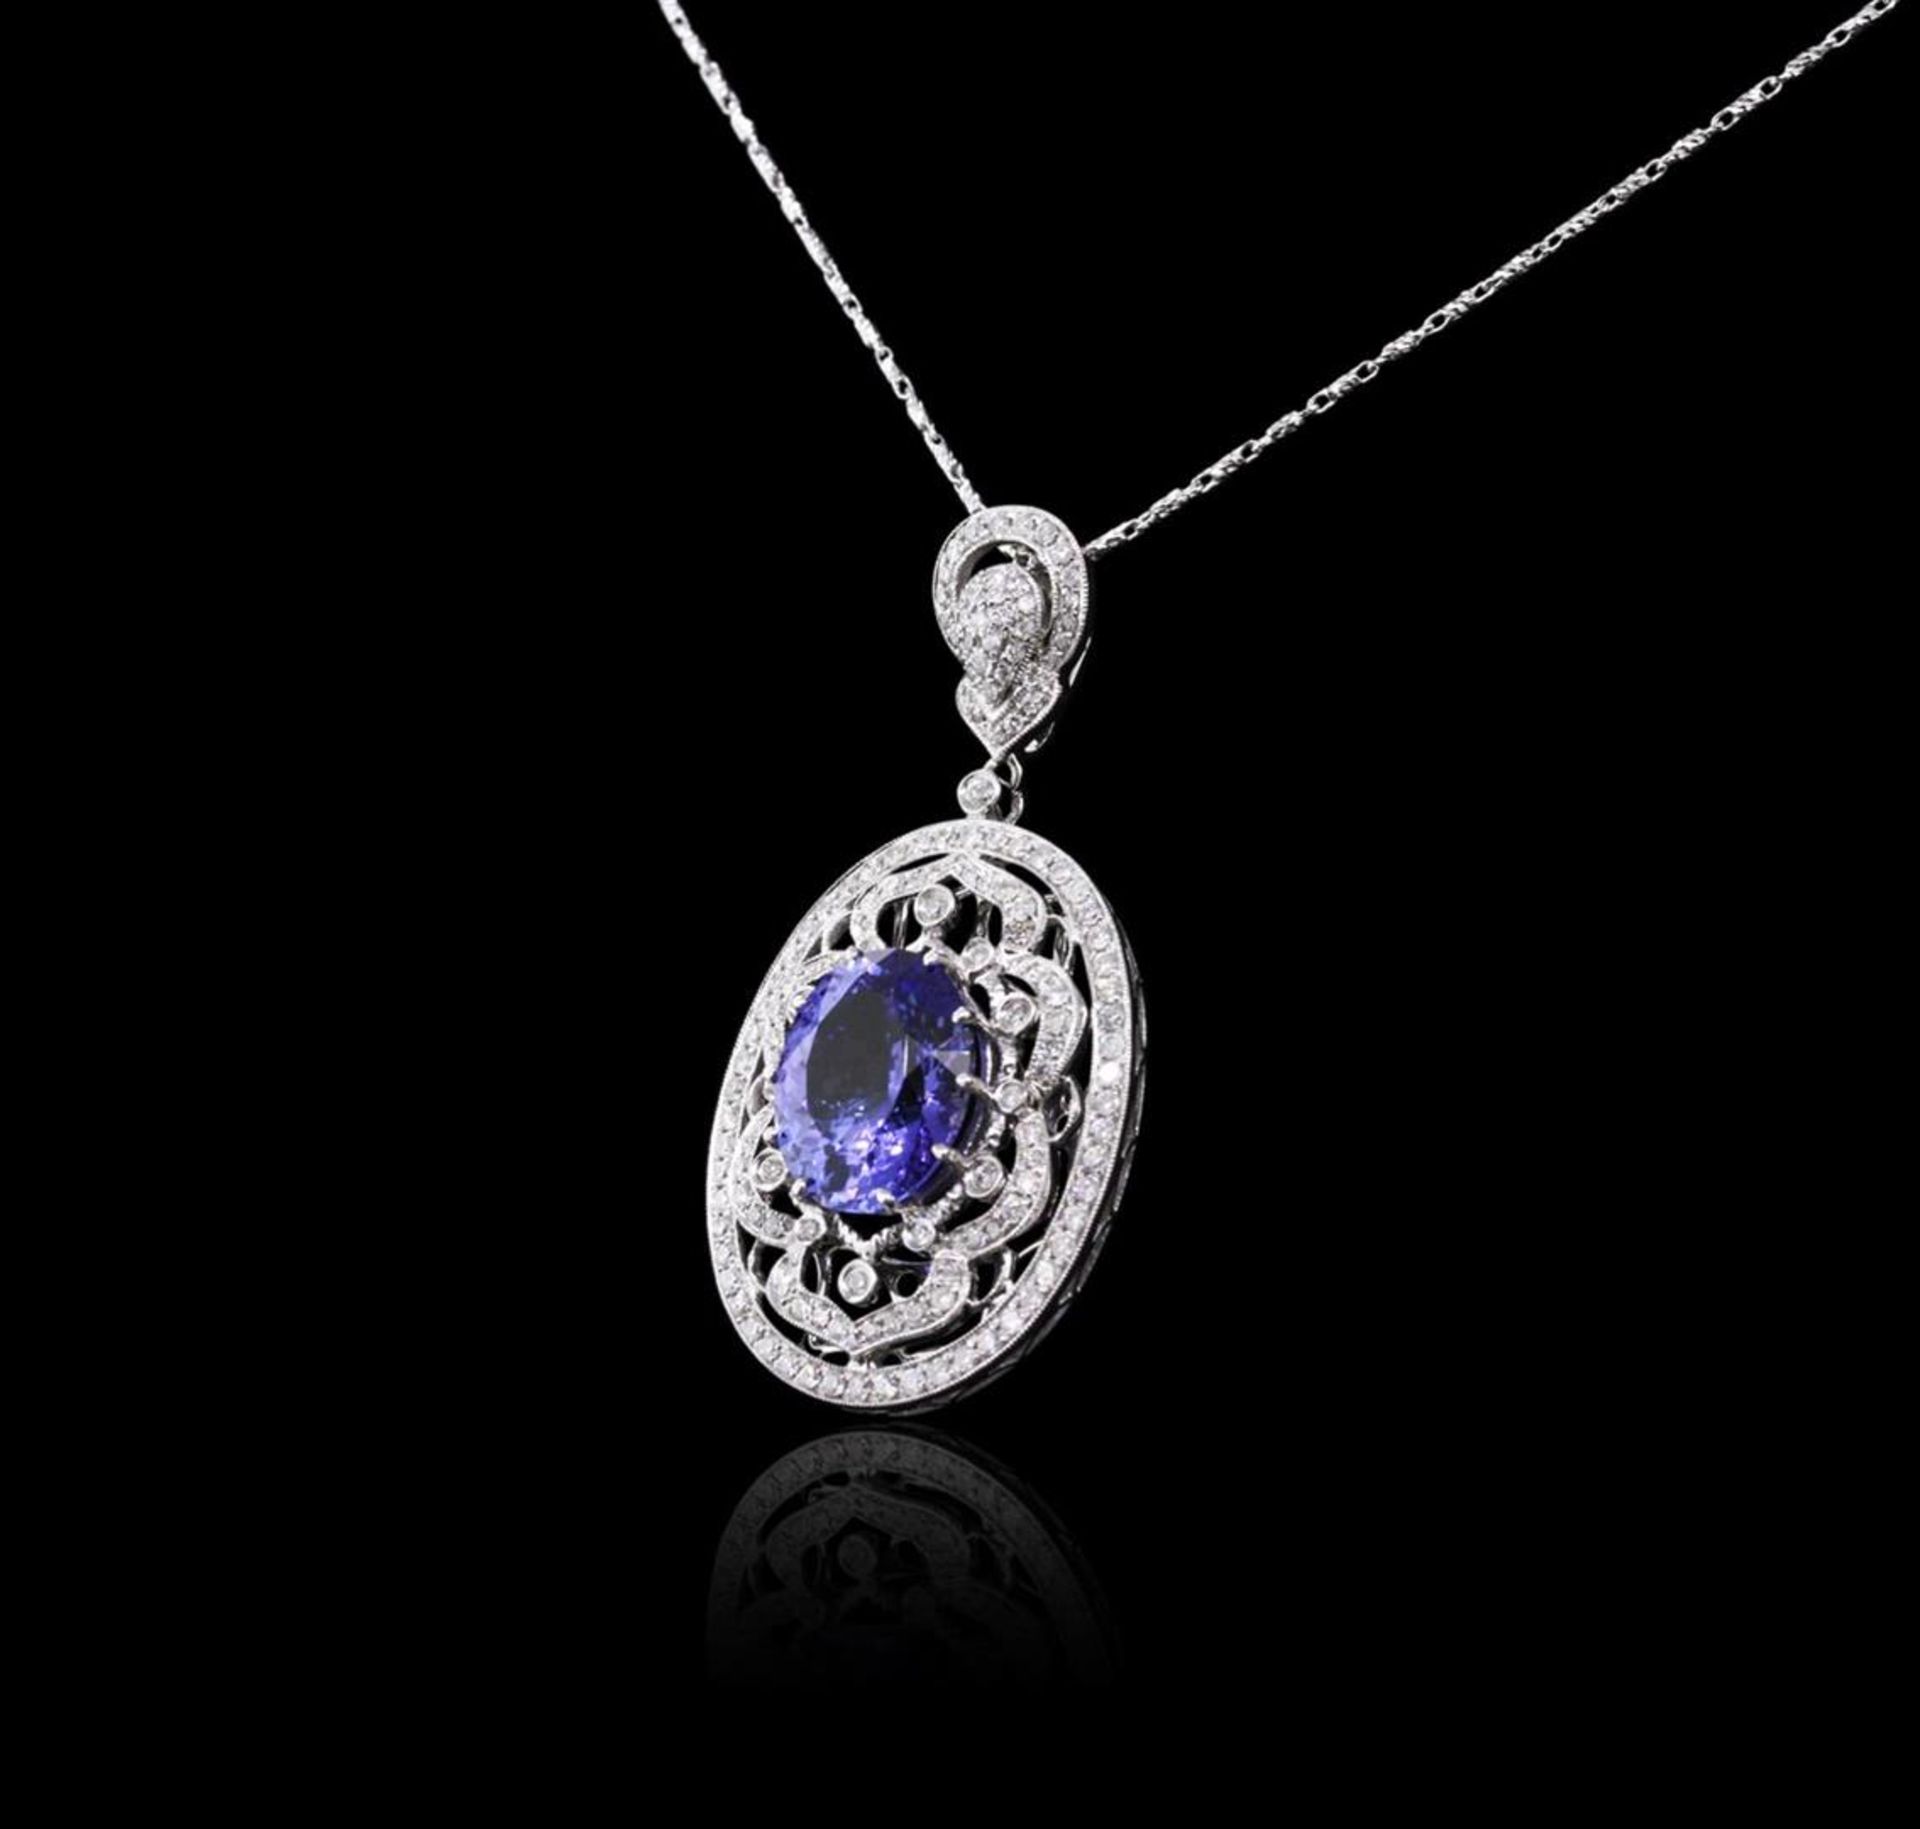 14KT White Gold 8.01 ctw Tanzanite and Diamond Pendant With Chain - Image 3 of 4